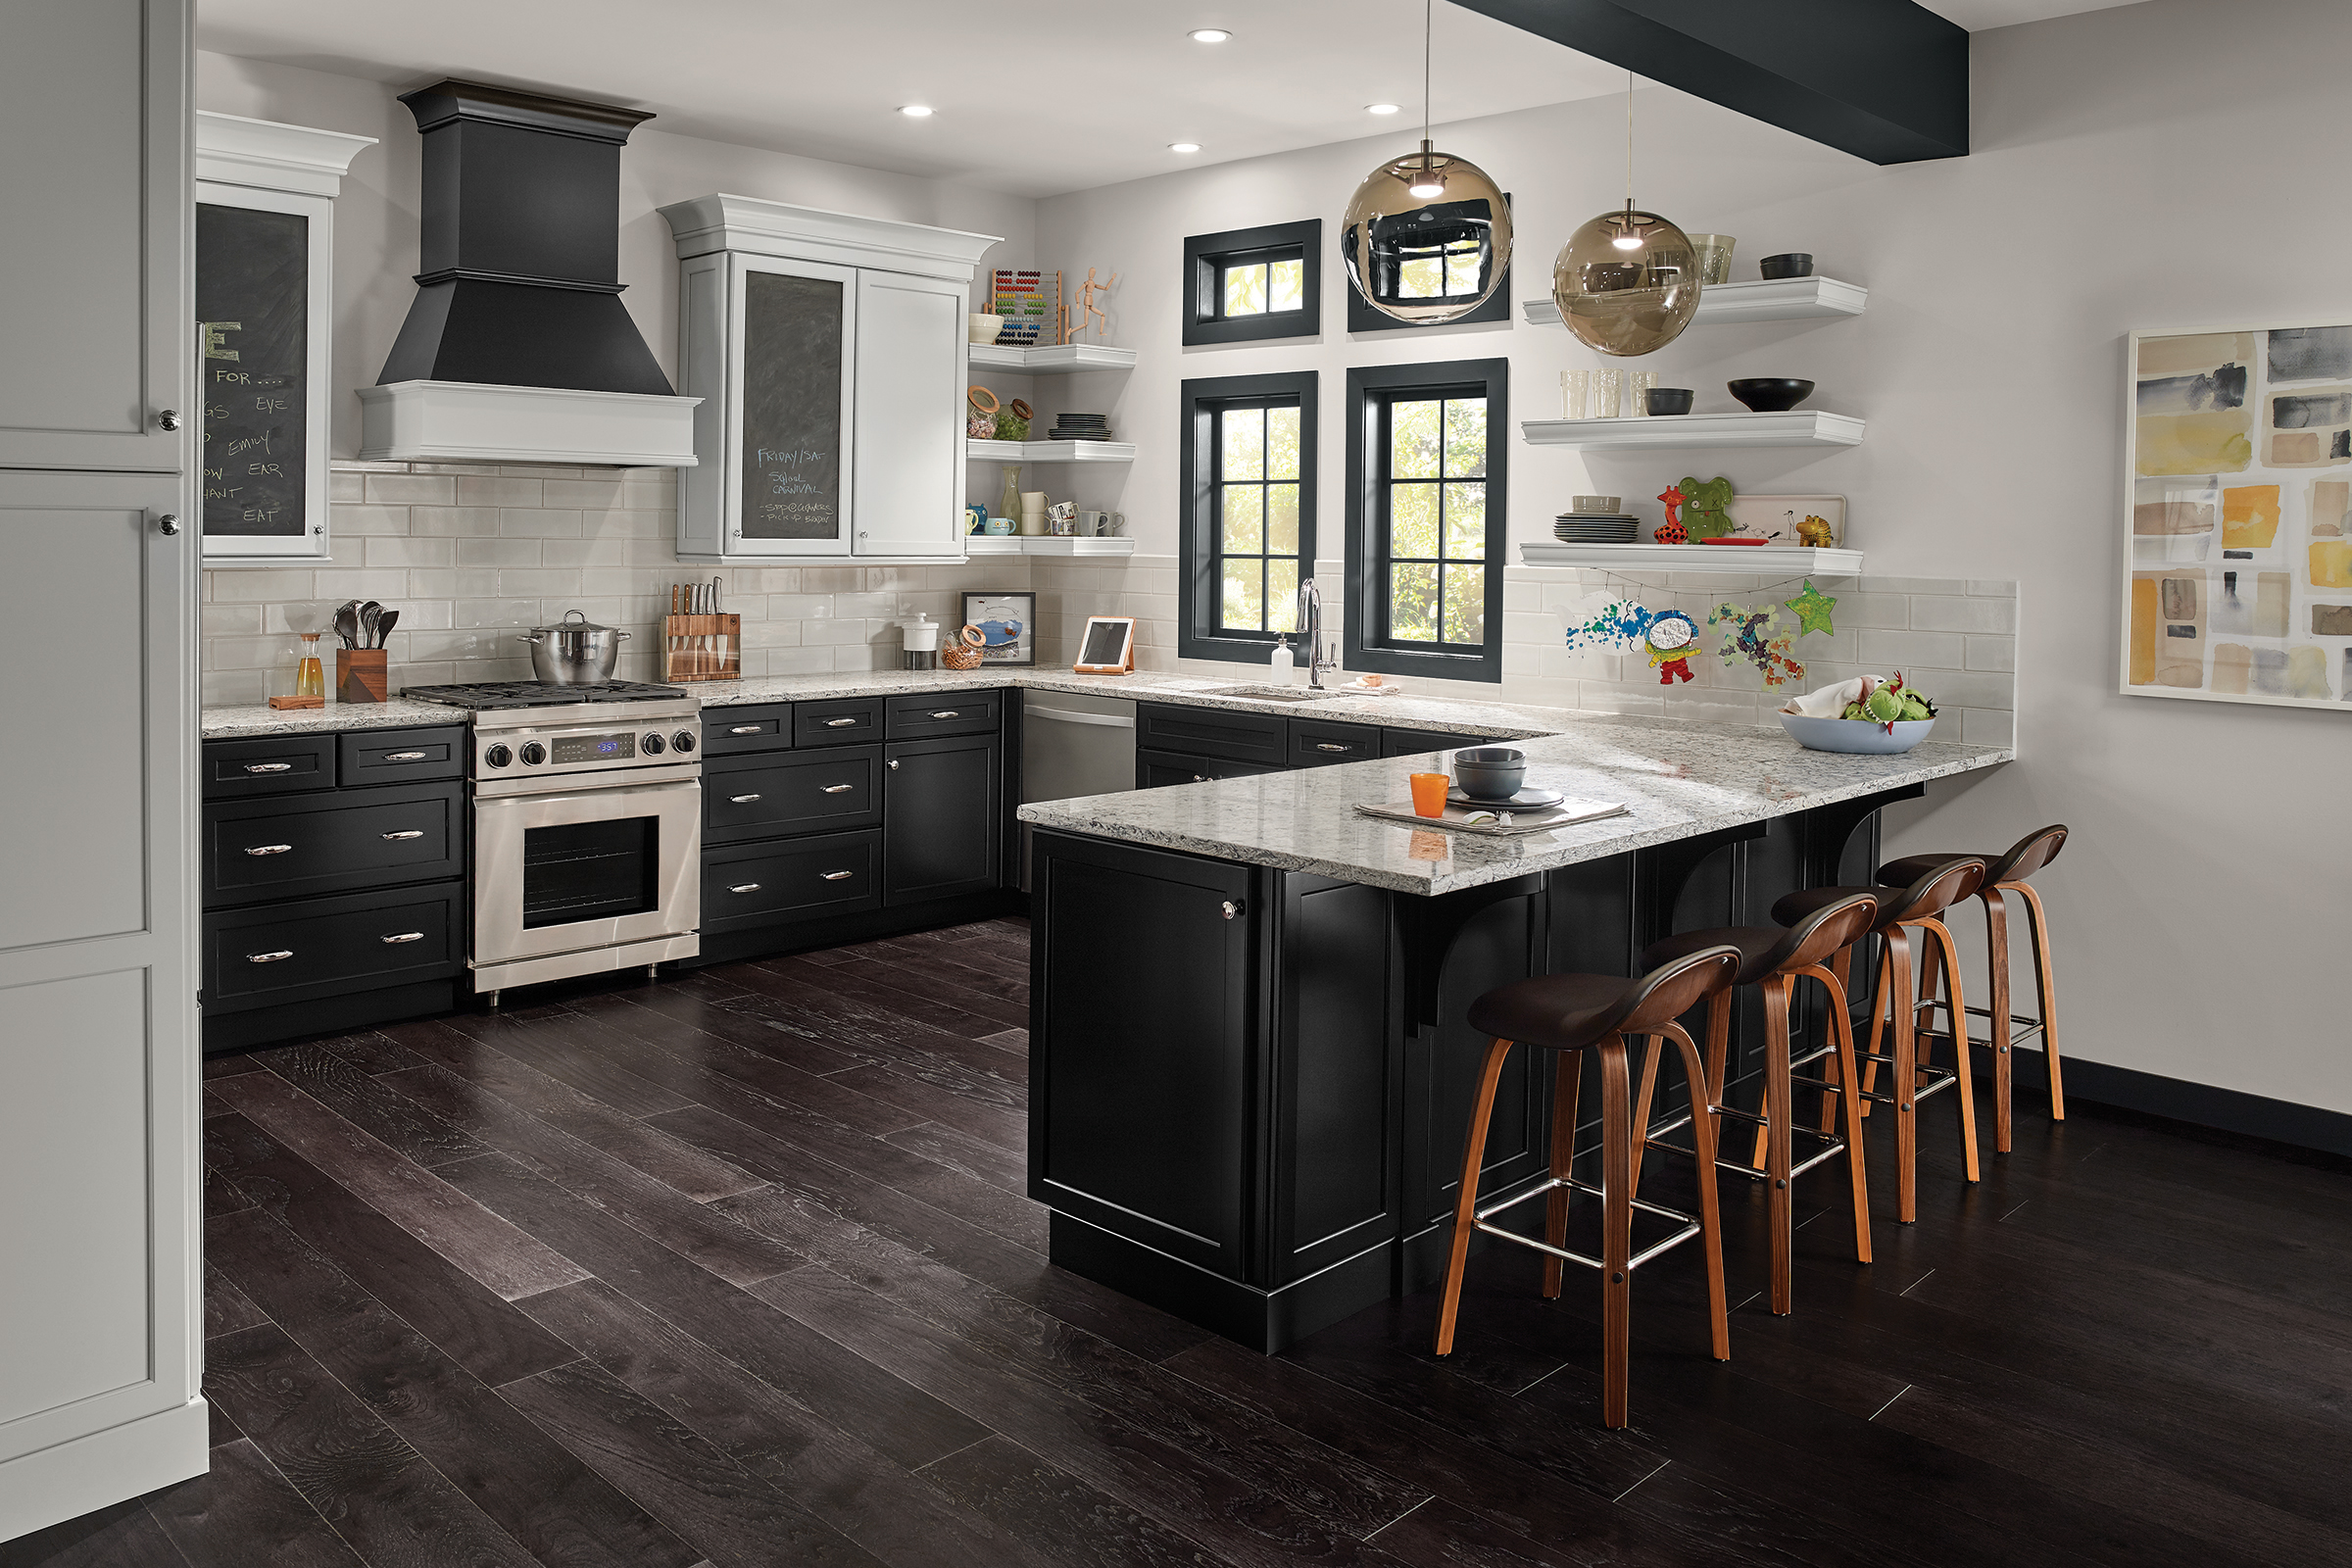 KraftMaid two-tone kitchen cabinets in black and white.